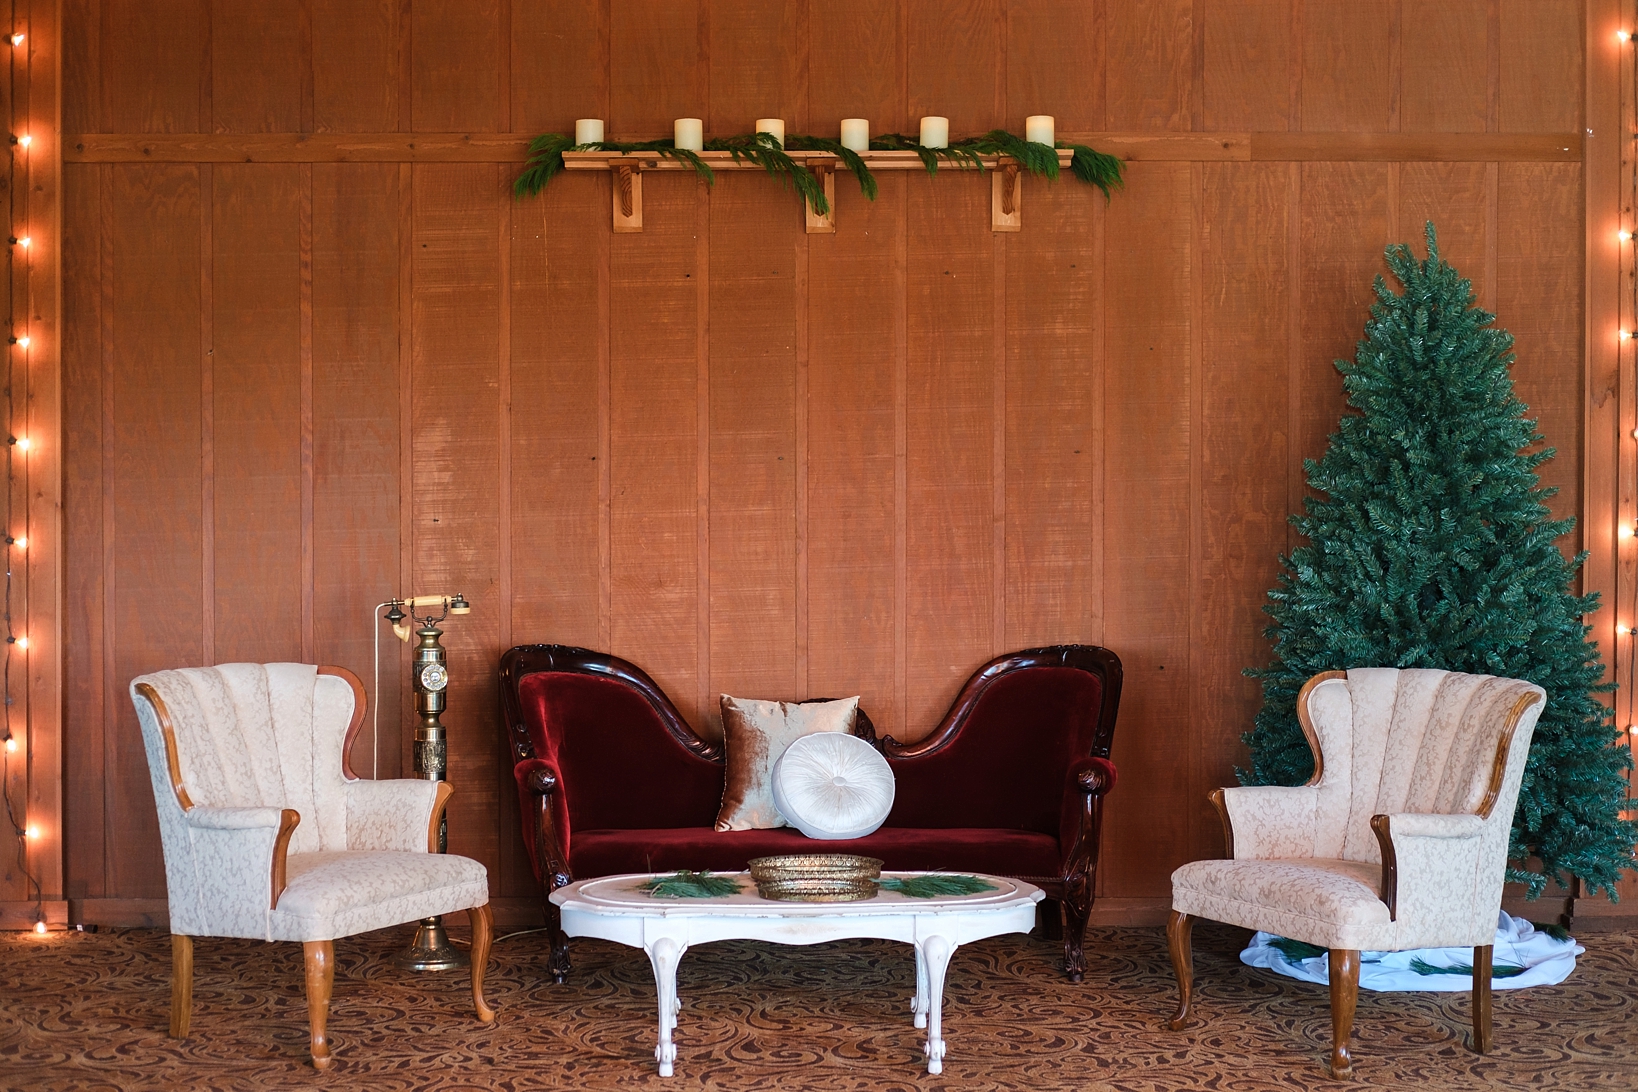 A seating area during the reception with vintage furniture